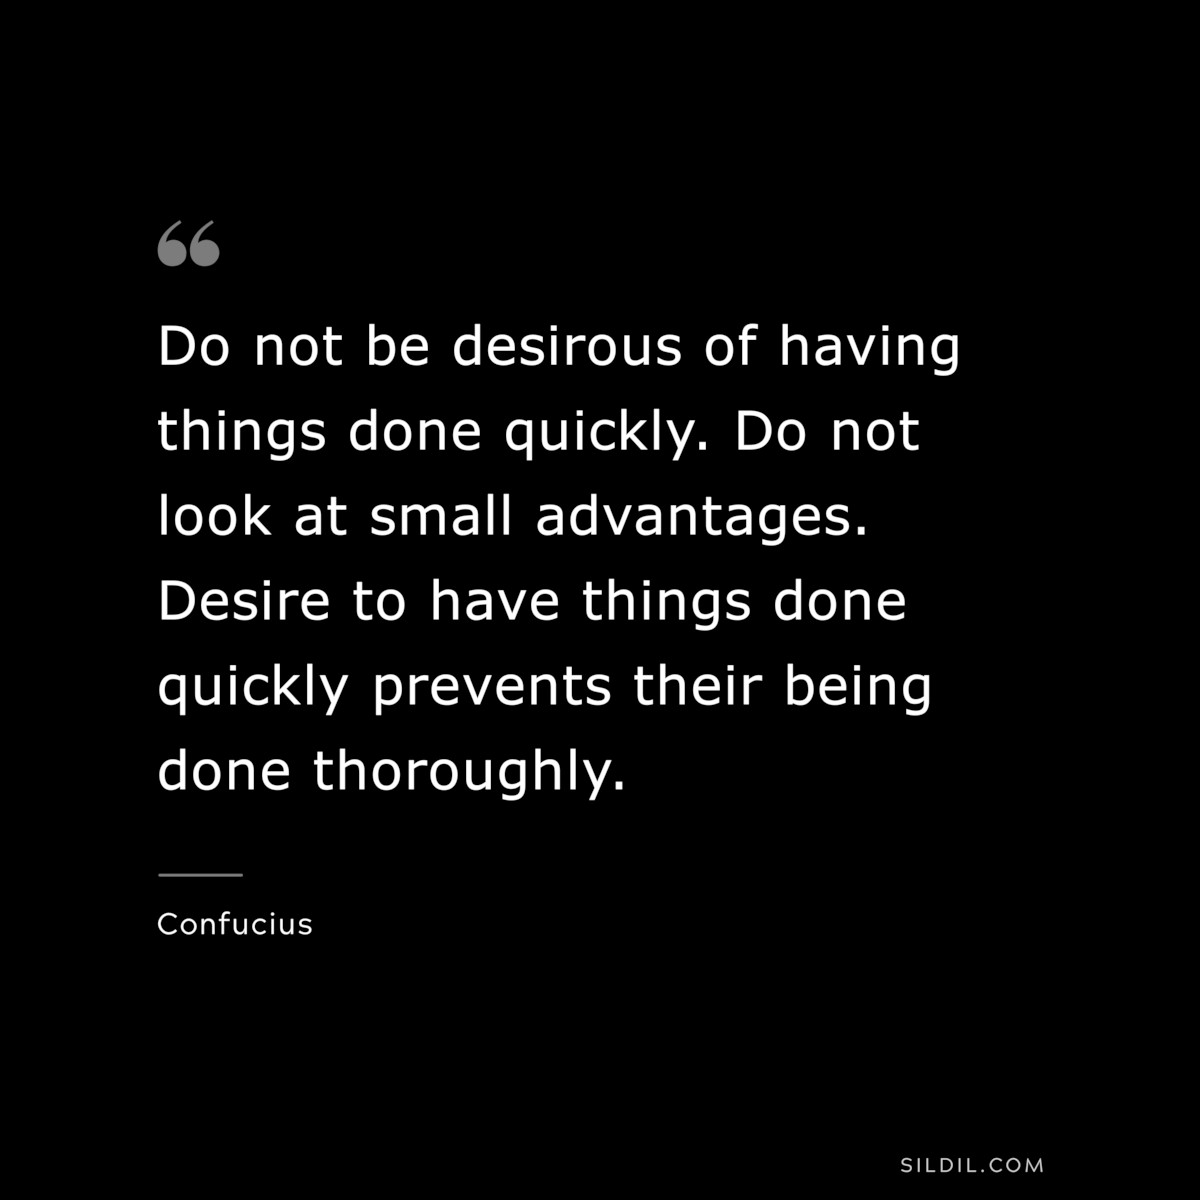 Do not be desirous of having things done quickly. Do not look at small advantages. Desire to have things done quickly prevents their being done thoroughly. ― Confucius